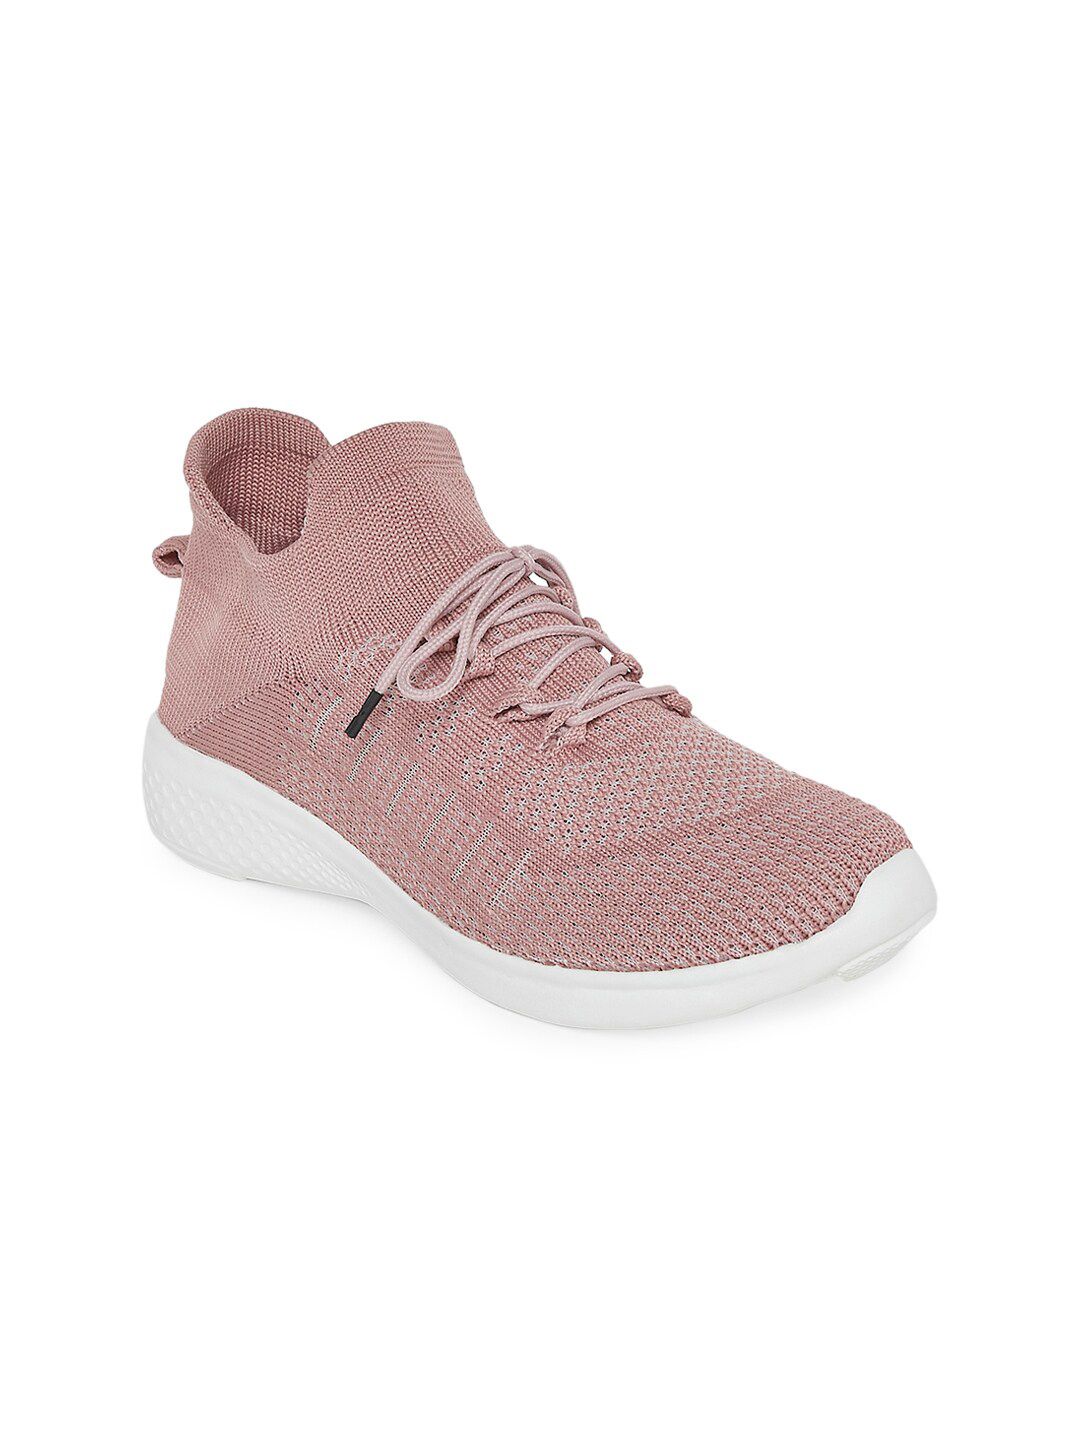 People Women Nude-Coloured Textile Walking Non-Marking Shoes Price in India